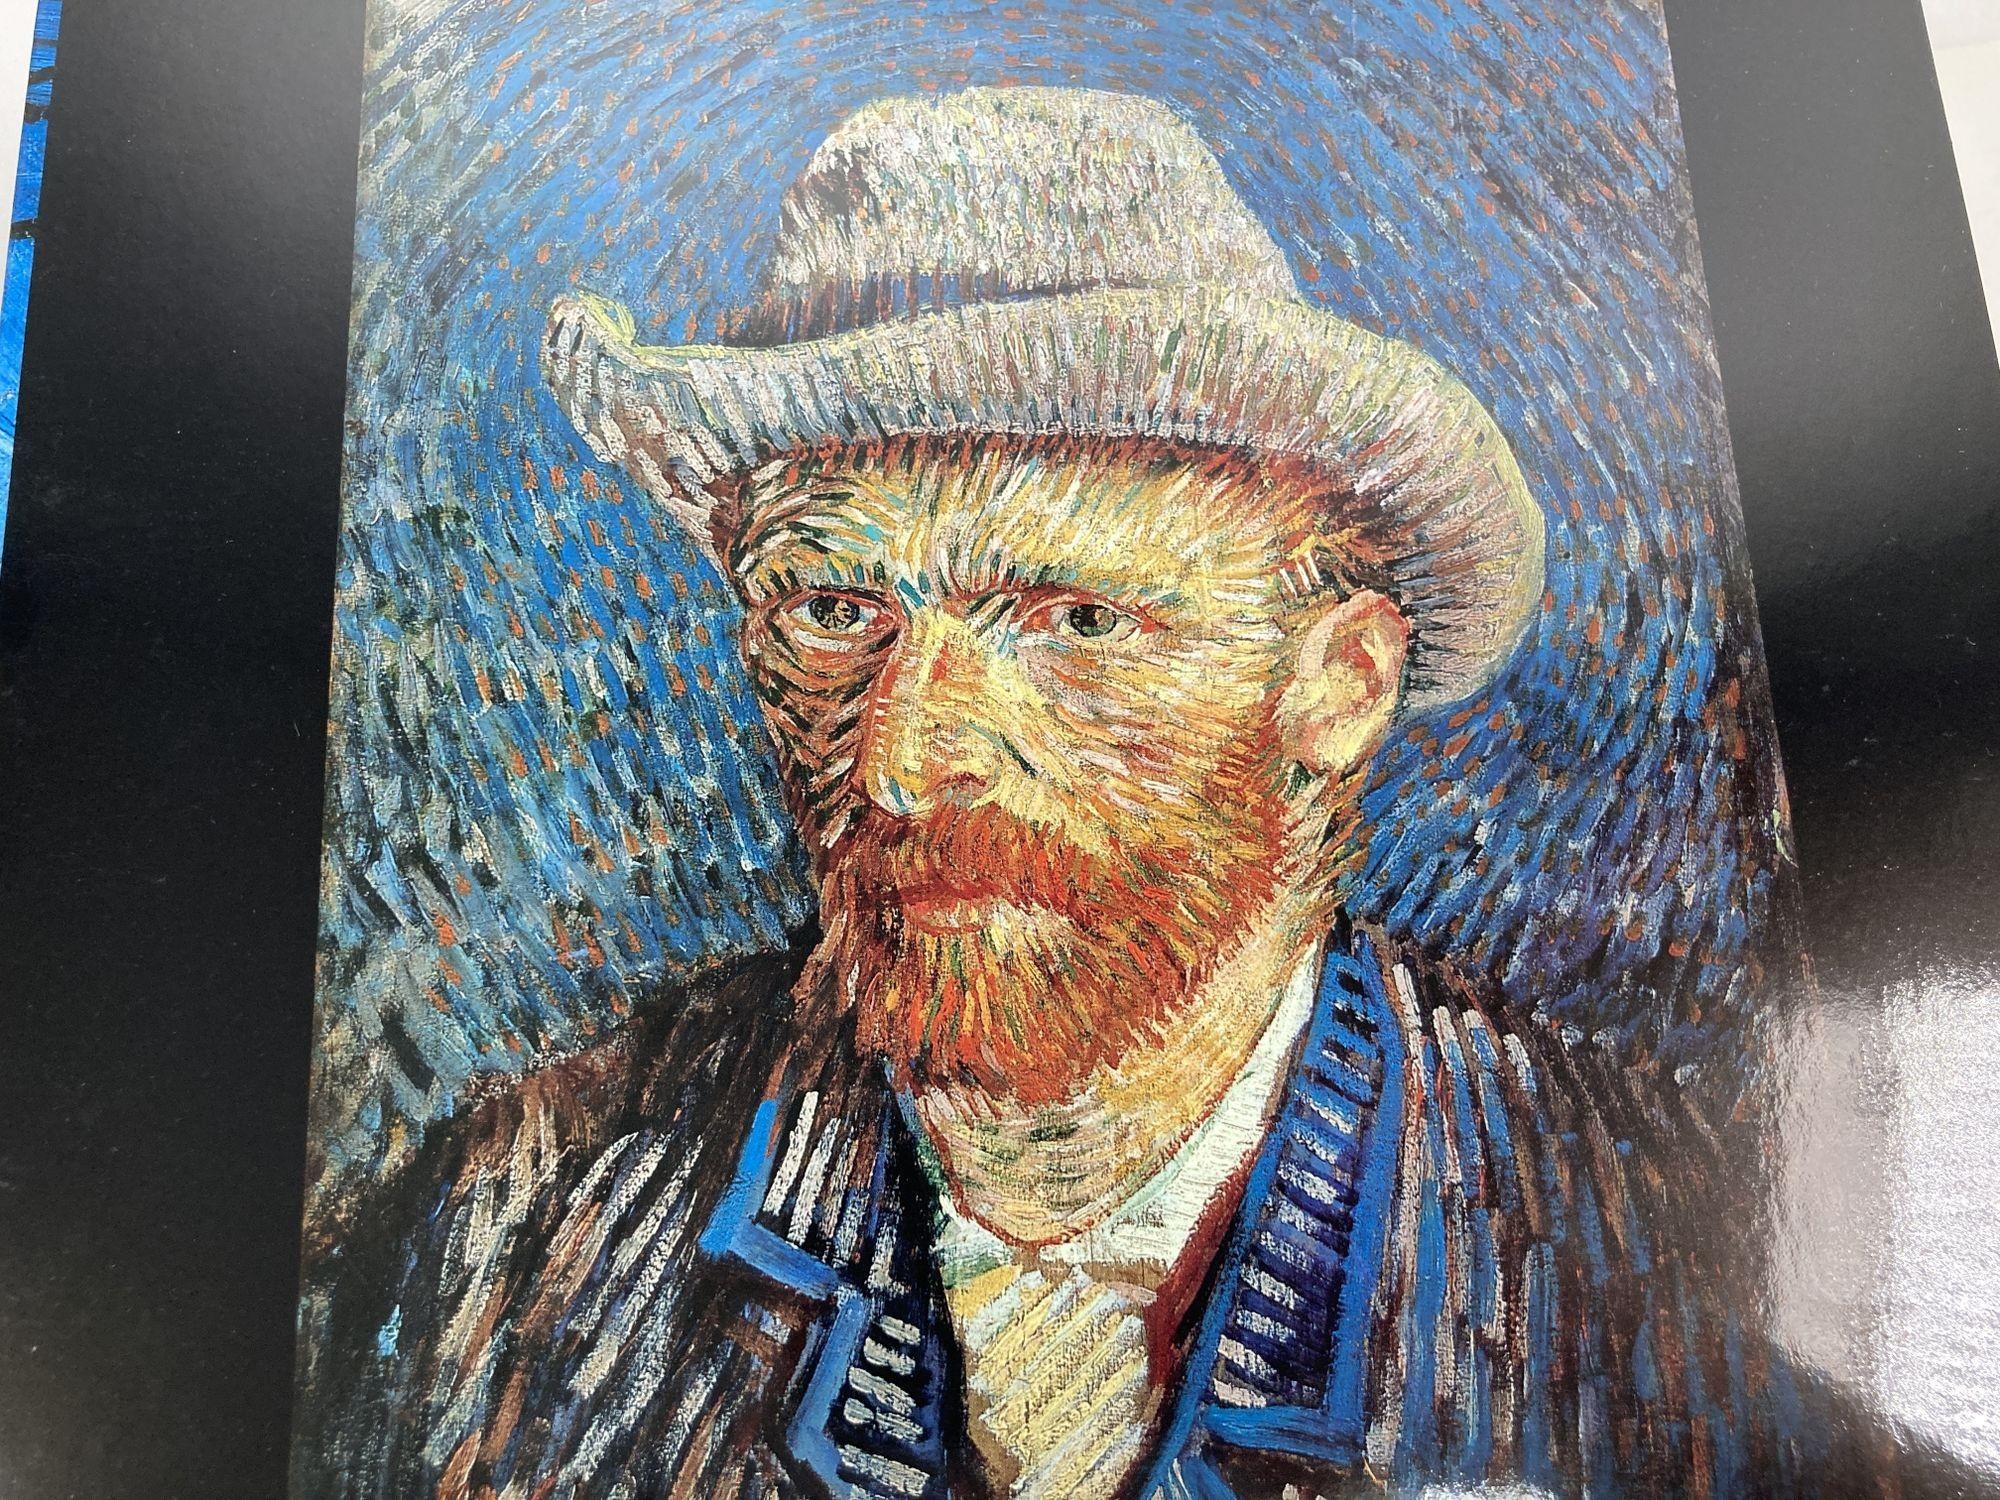 20th Century Van Gogh's Van Goghs: Masterpieces from the Van Gogh Museum, Amsterdam Book For Sale